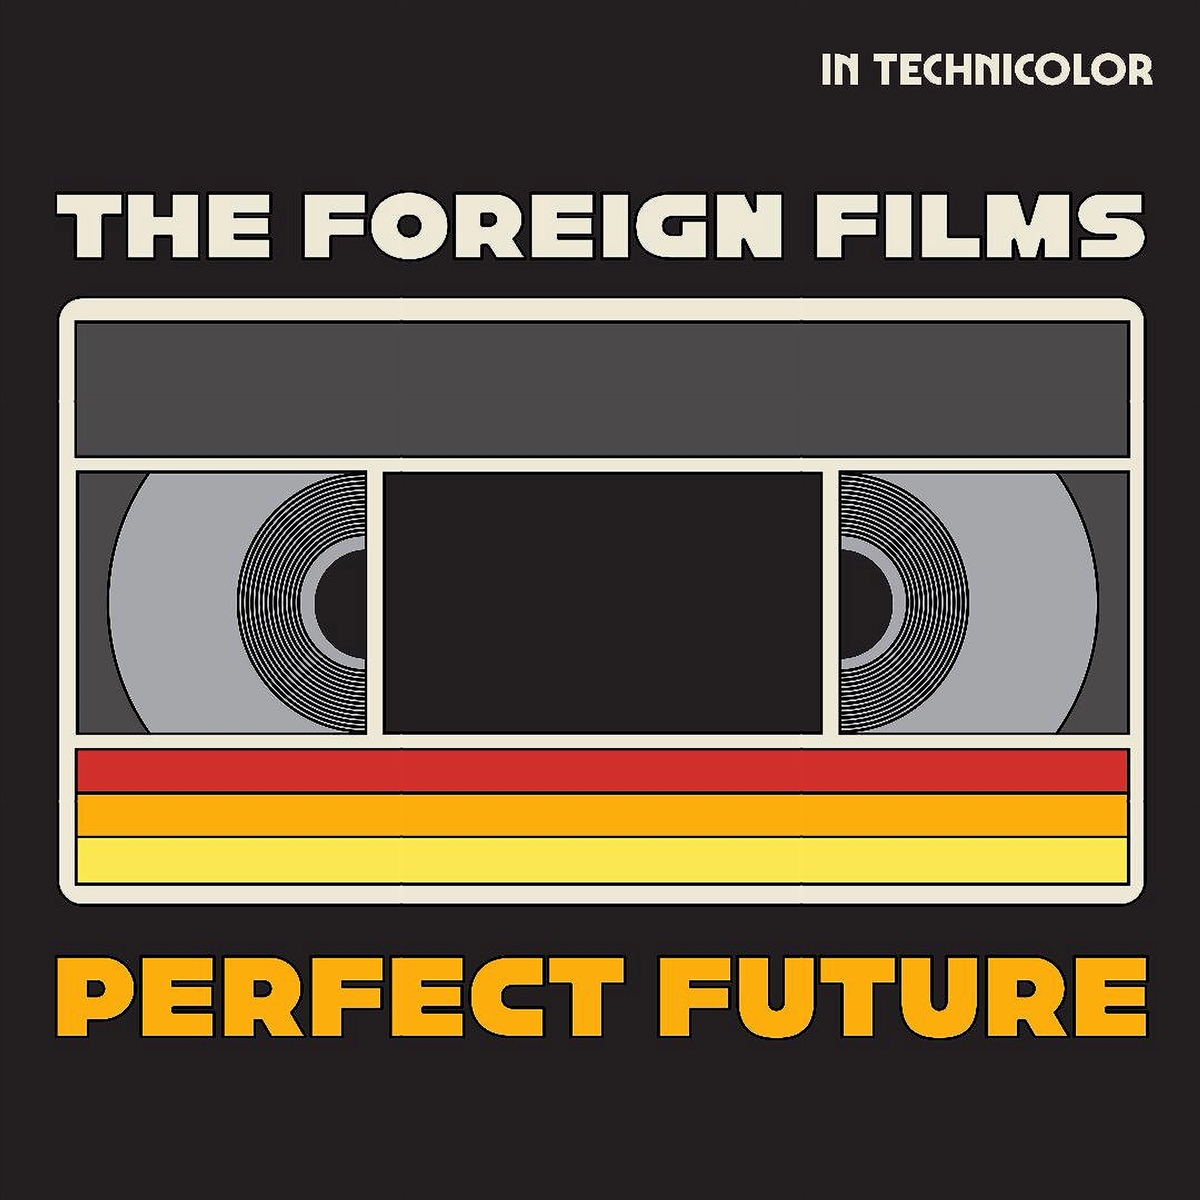 Listen to this one! Perfect Future by @theforeignfilms - Catch the magic on bigindiegiant.com